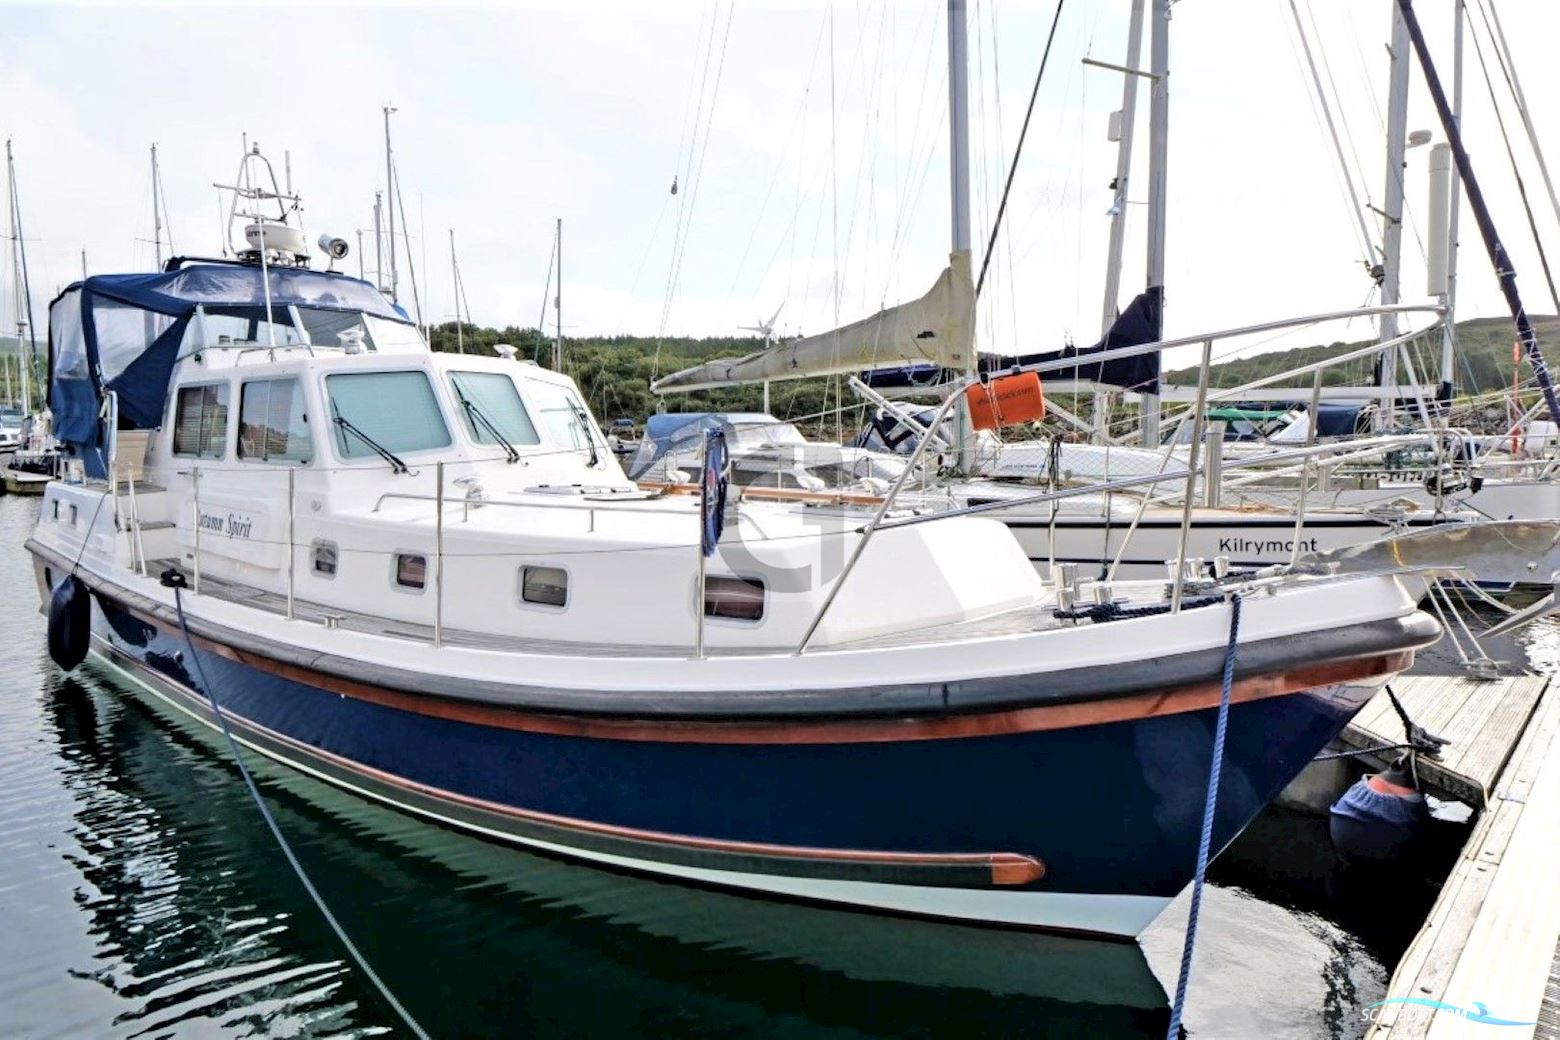 Dale Nelson 38 Aft Cabin Sailing boat 2003, with Yanmar 6LY2A-Stp engine, United Kingdom